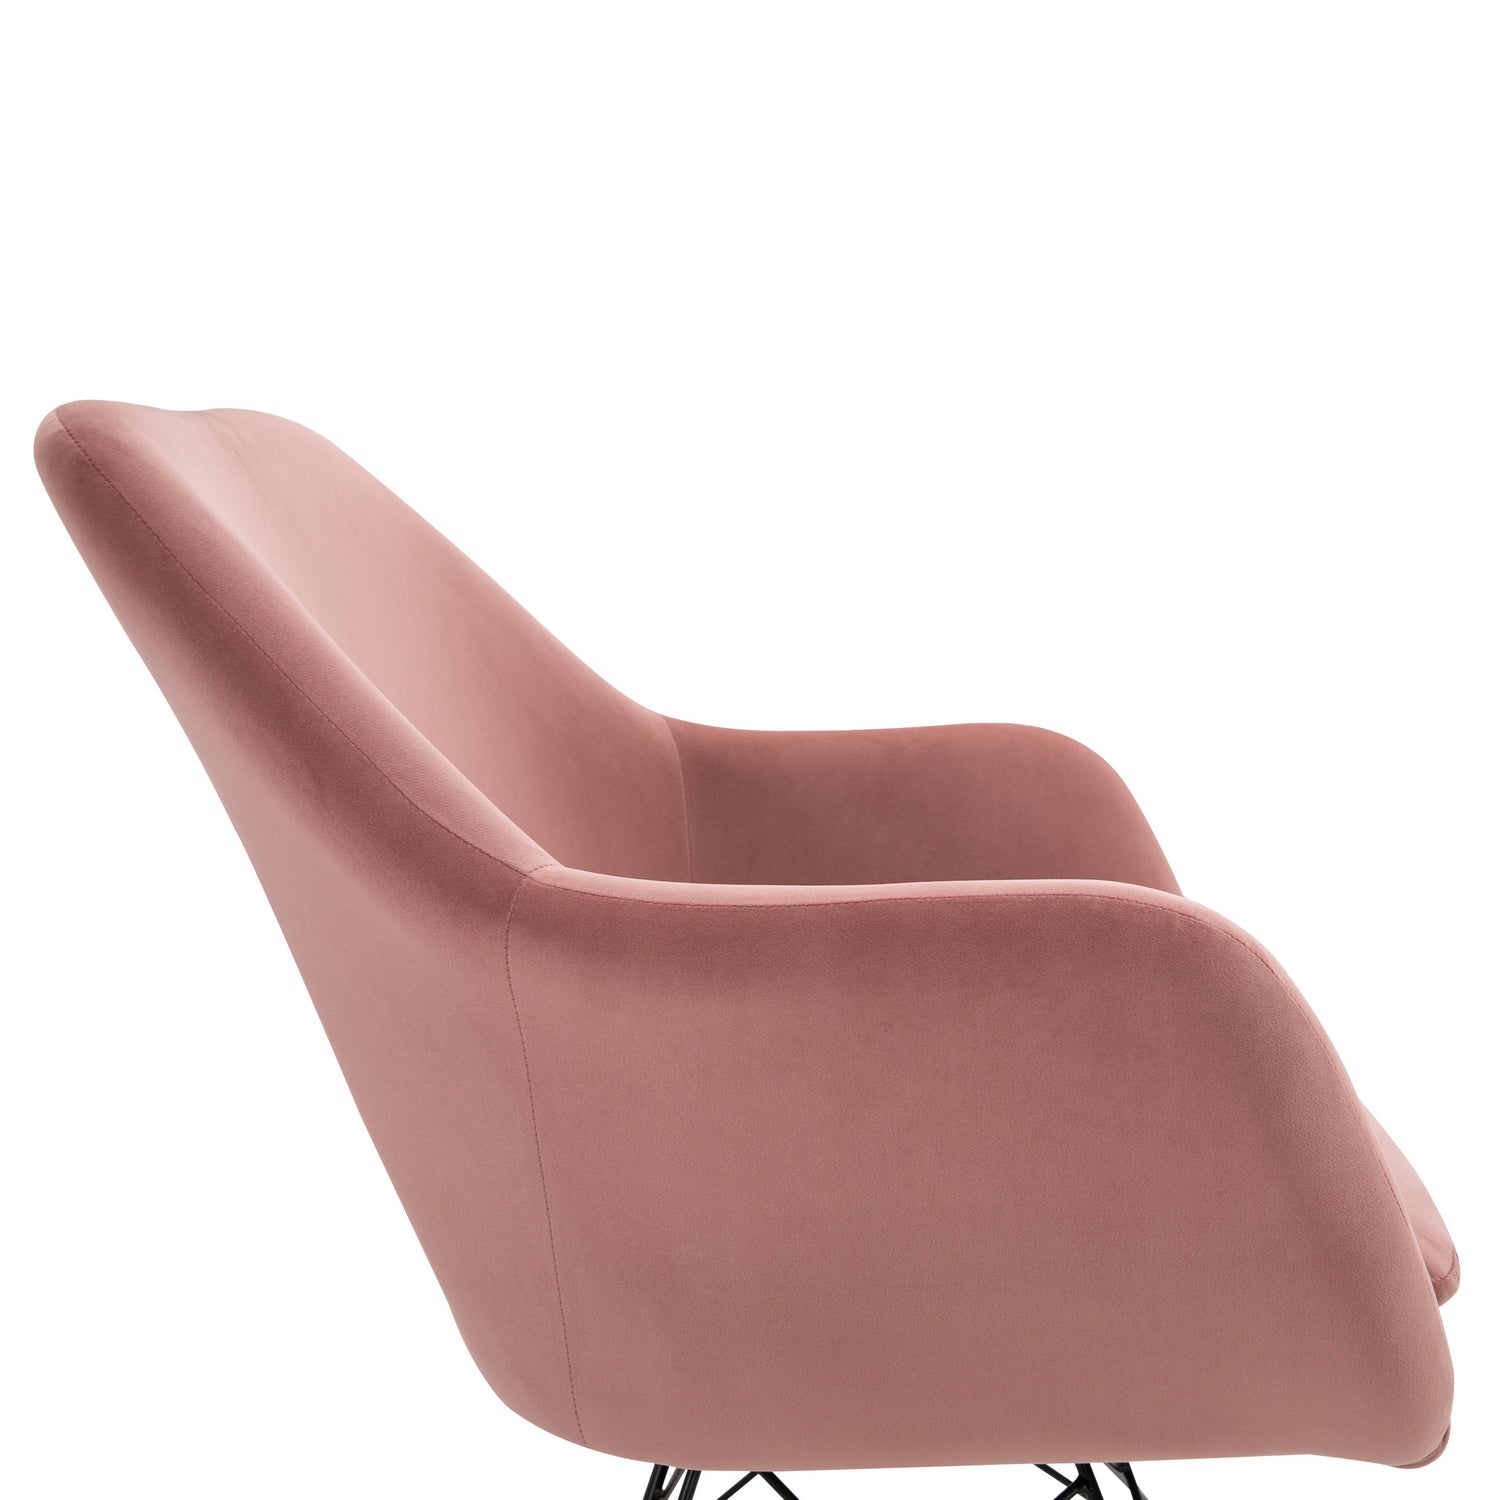 GP Rocking Chair with Upholstered Seat Cushion in Pink 33.5''H x 26.4''W x 29.5''D